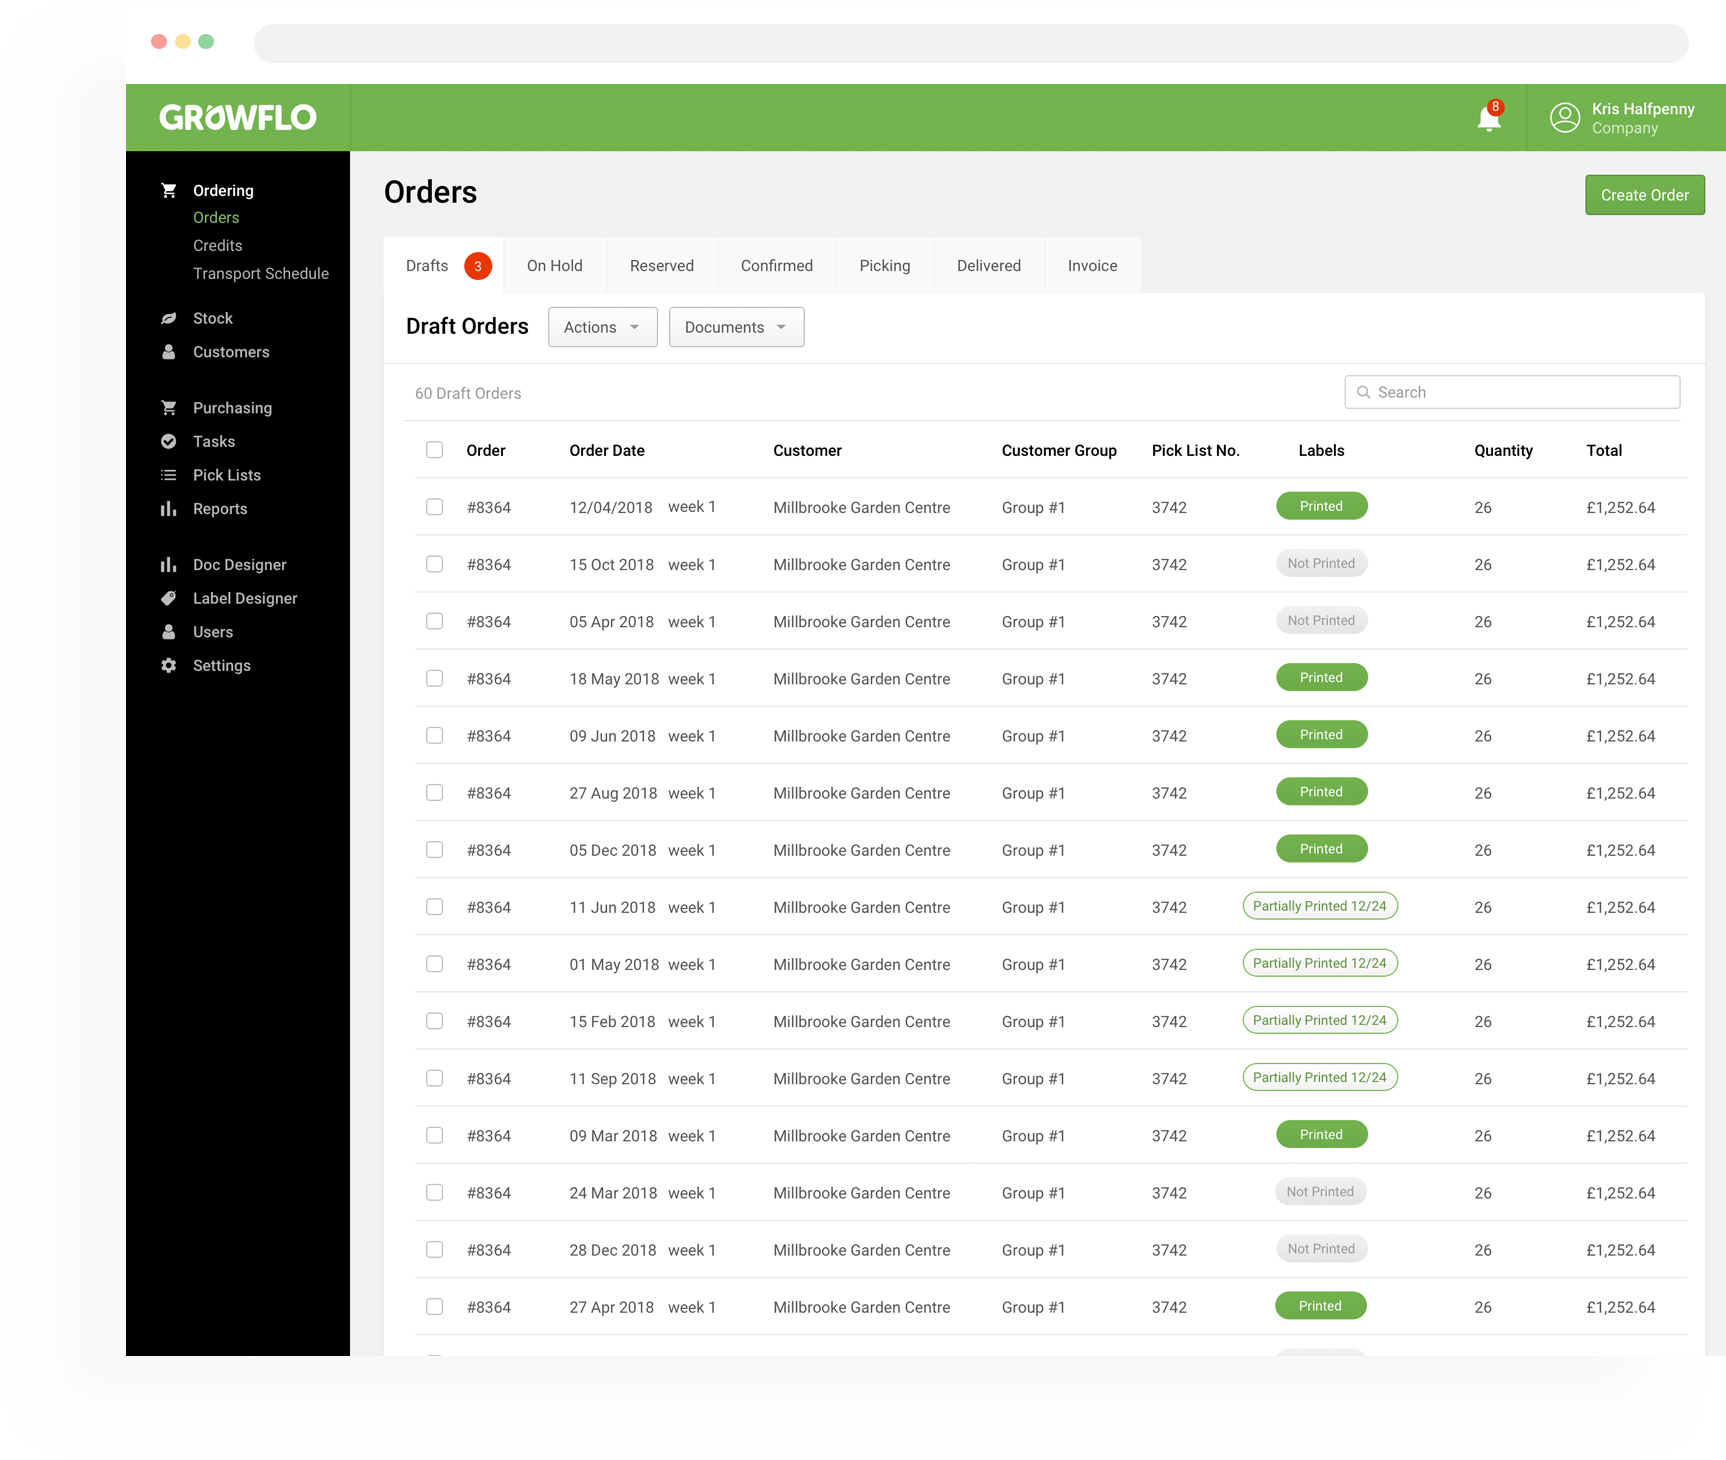 The Orders section of the Growflo system